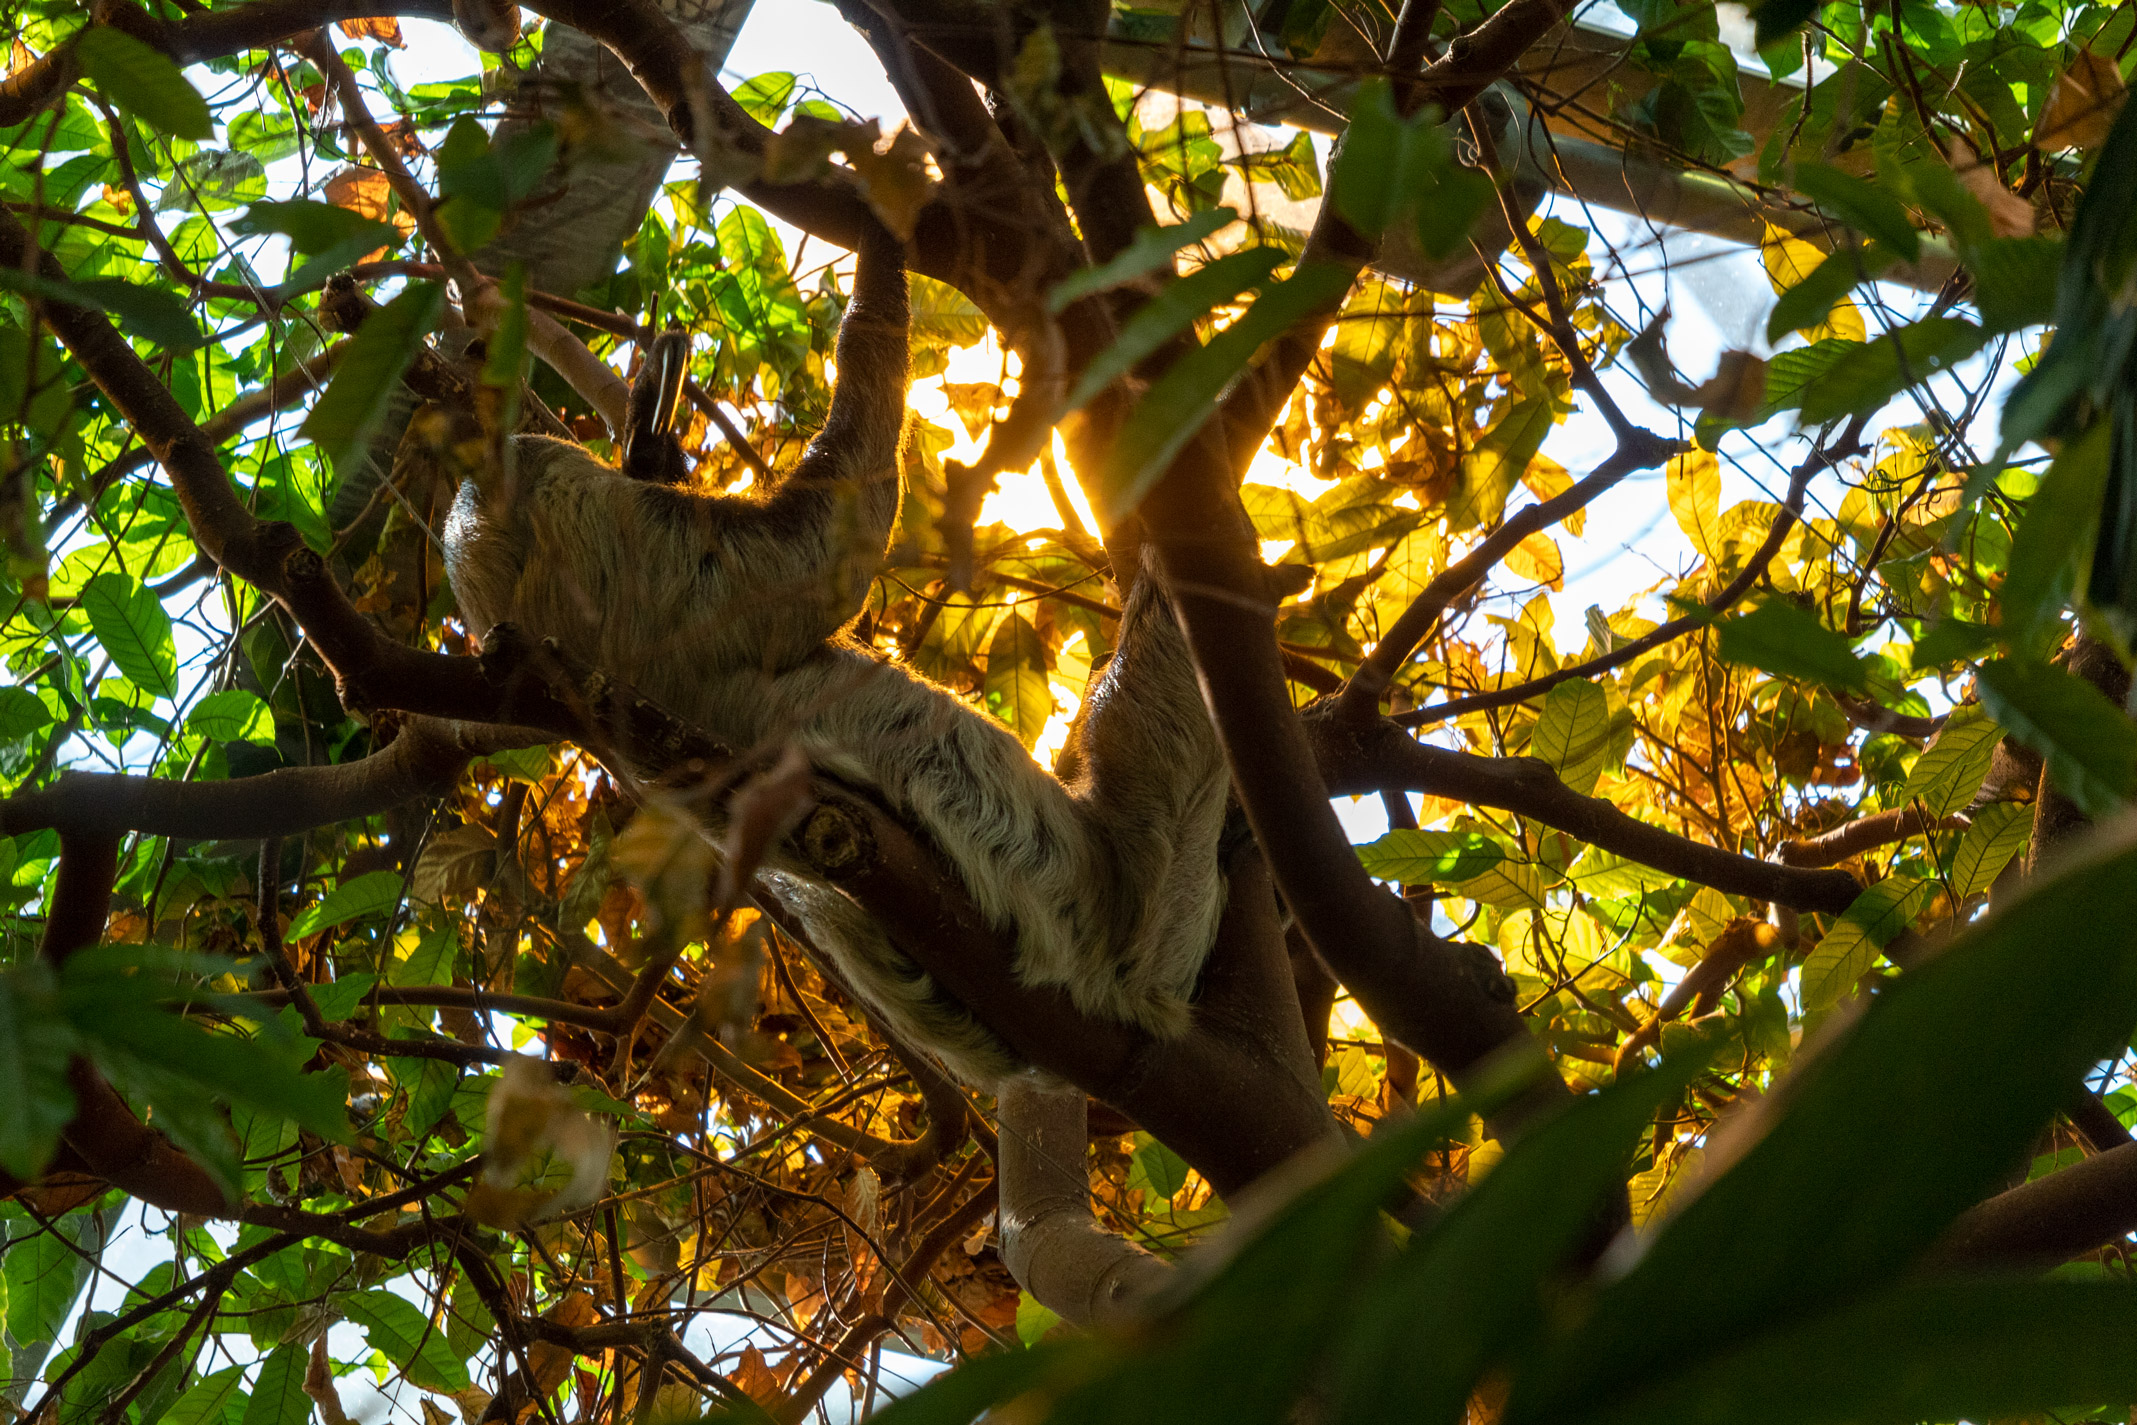 Sloth in a tree canopy, laying on its back